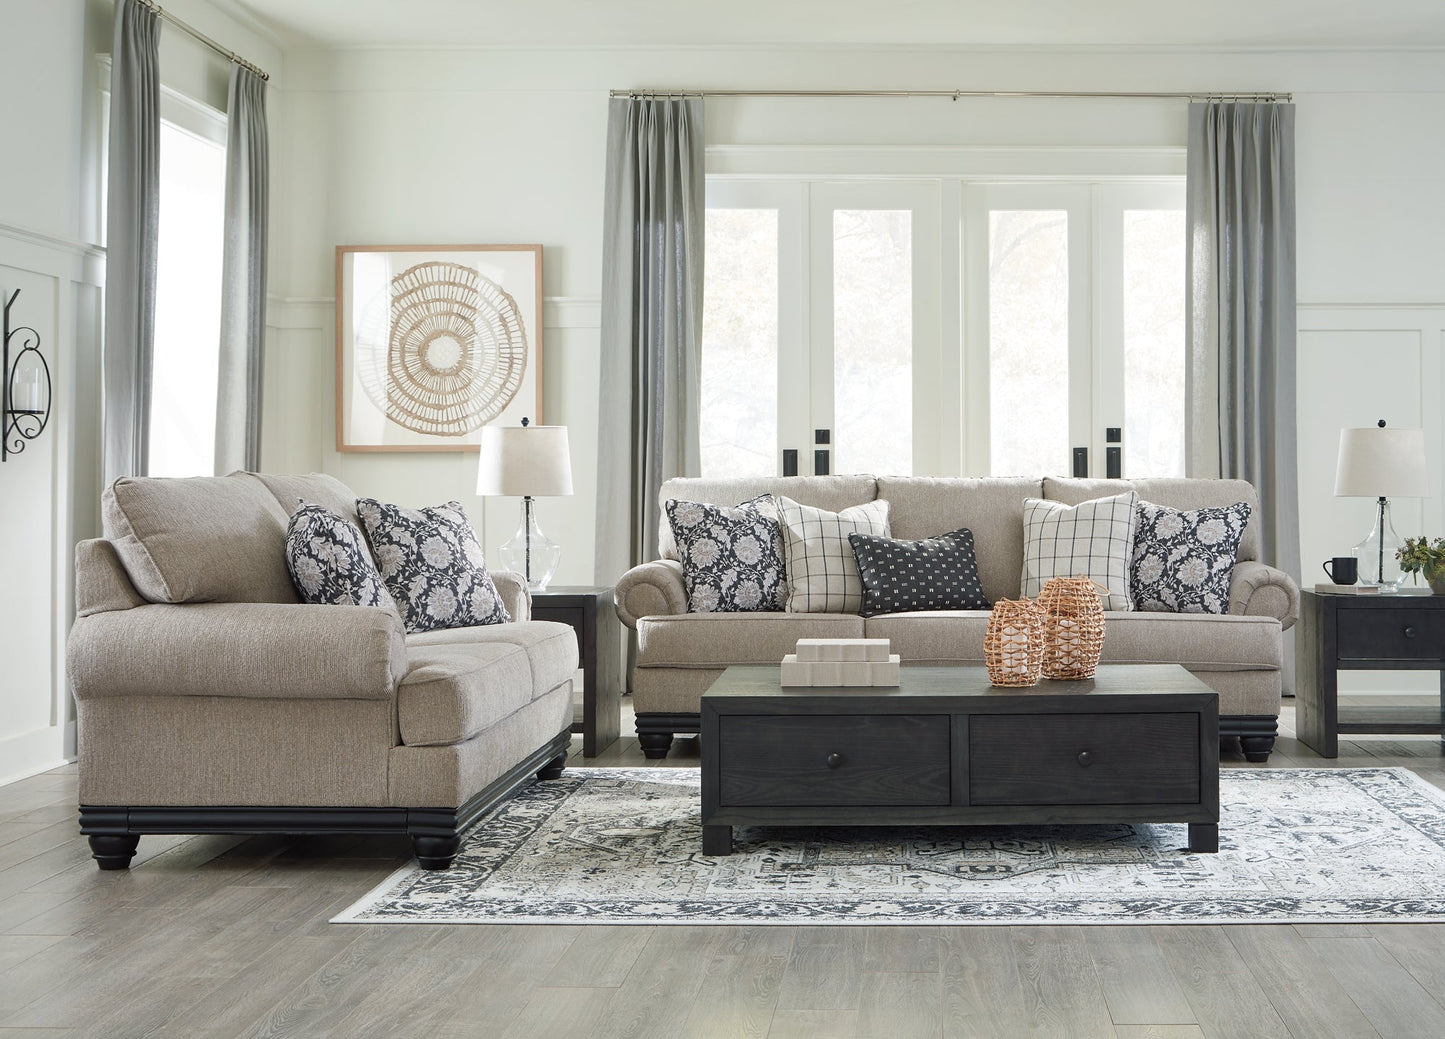 Elbiani Sofa and Loveseat at Walker Mattress and Furniture Locations in Cedar Park and Belton TX.